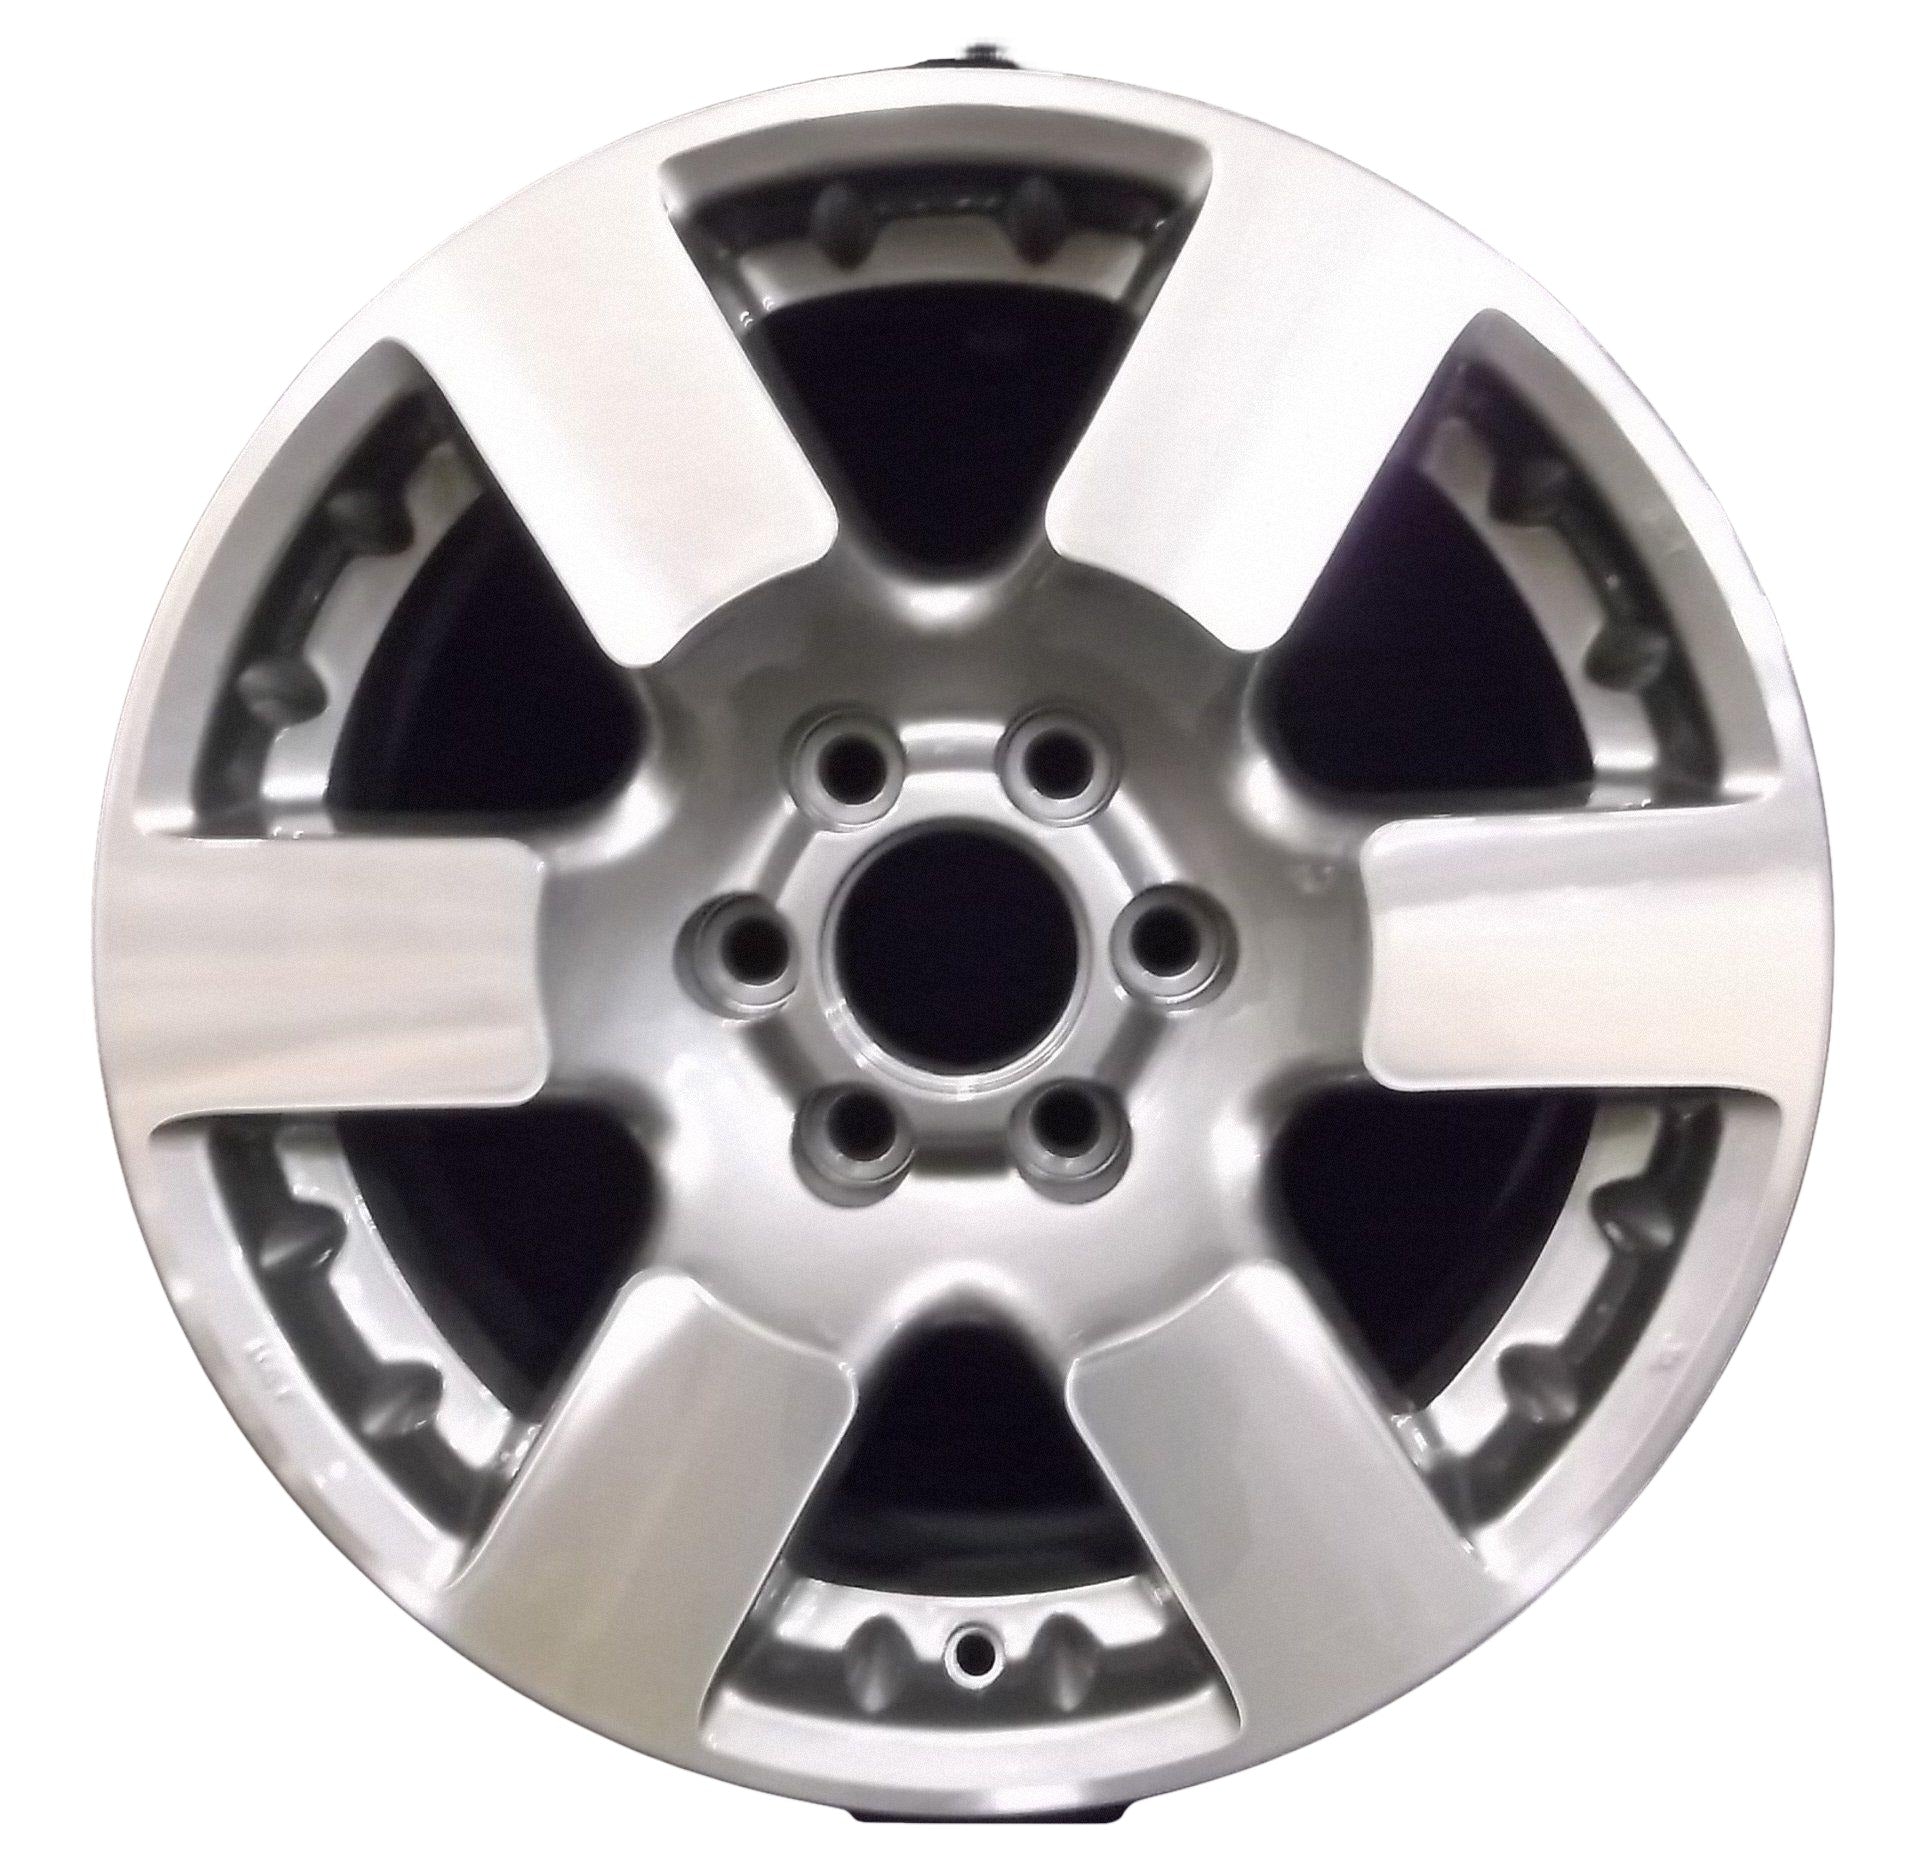 Nissan Frontier  2004, 2005, 2006, 2007, 2008, 2009, 2010, 2011, 2012 Factory OEM Car Wheel Size 16x7 Alloy WAO.62448.LC25.MA